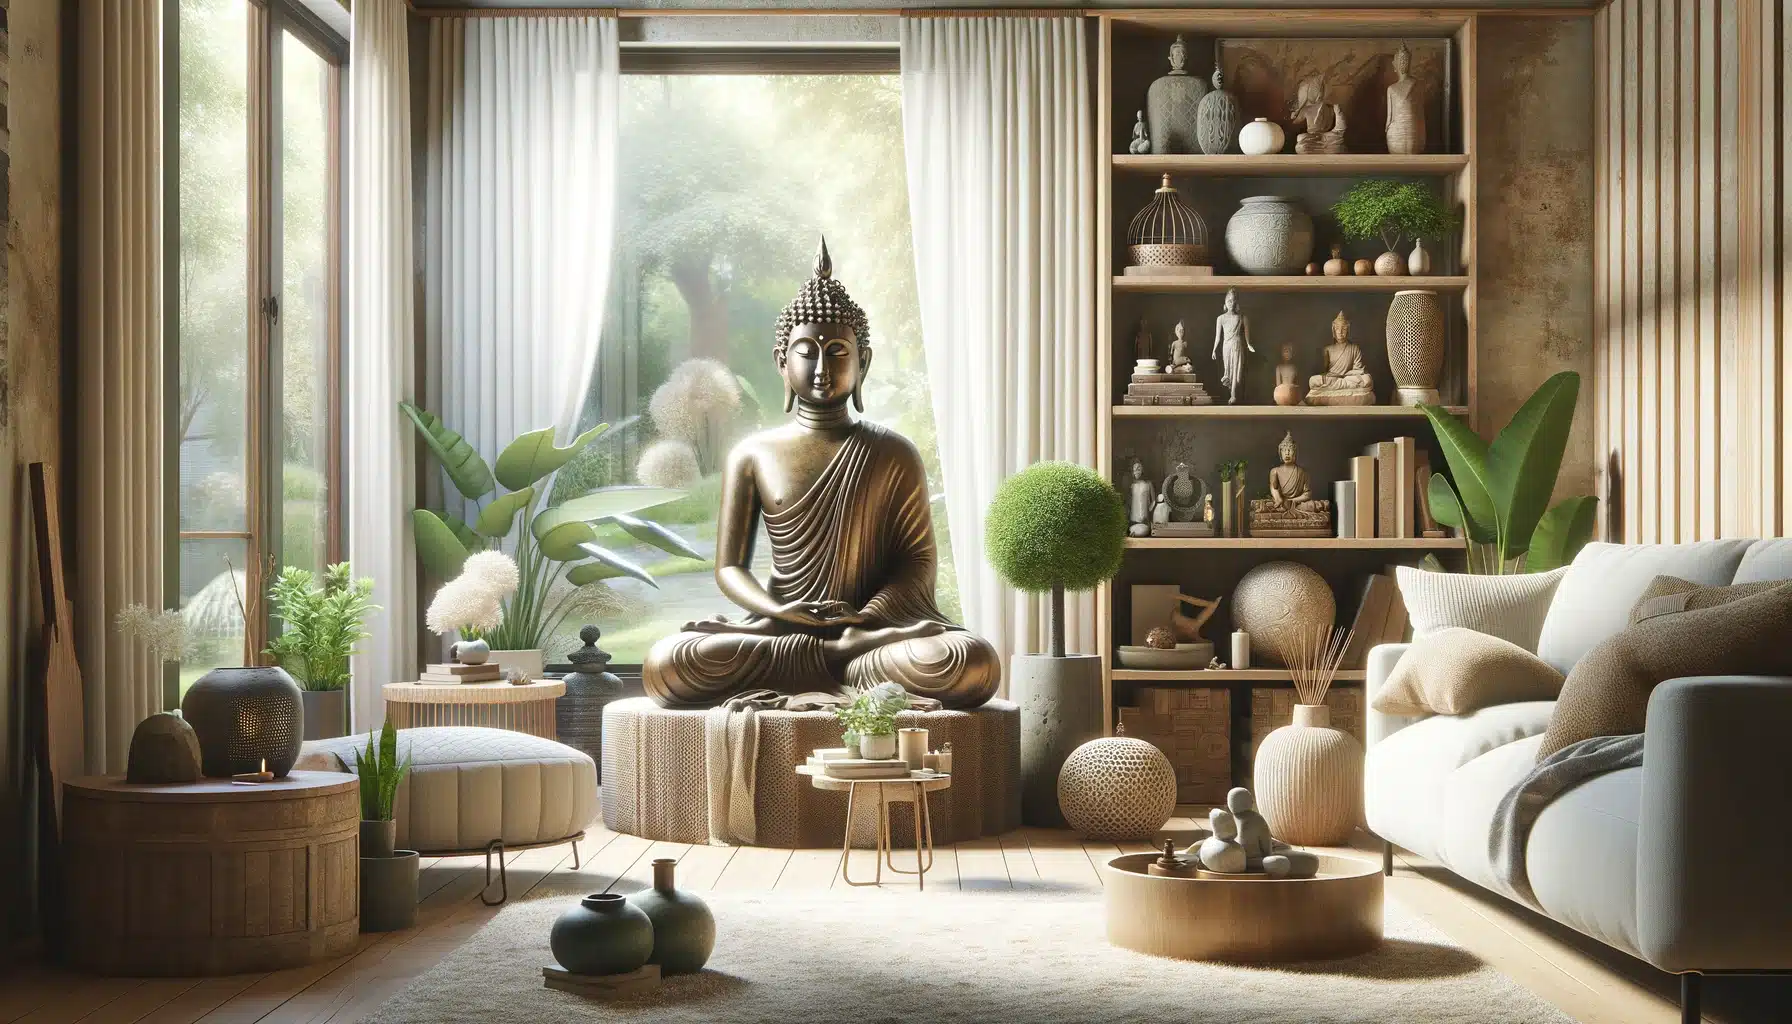 This feature image depicts a serene and harmonious Buddha-themed decor within a cozy, lived-in home environment. At the center, a detailed Buddha statue in meditation pose serves as the focal point, surrounded by natural elements like lush houseplants and soft furnishings. The room is bathed in soft, natural light that filters through the windows, highlighting the tranquil ambiance and the careful integration of spiritual elements into everyday life. Everyday home items are placed thoughtfully around the space, blending seamlessly with the spiritual decor to create a peaceful retreat that reflects the balance and harmony of its inhabitants.